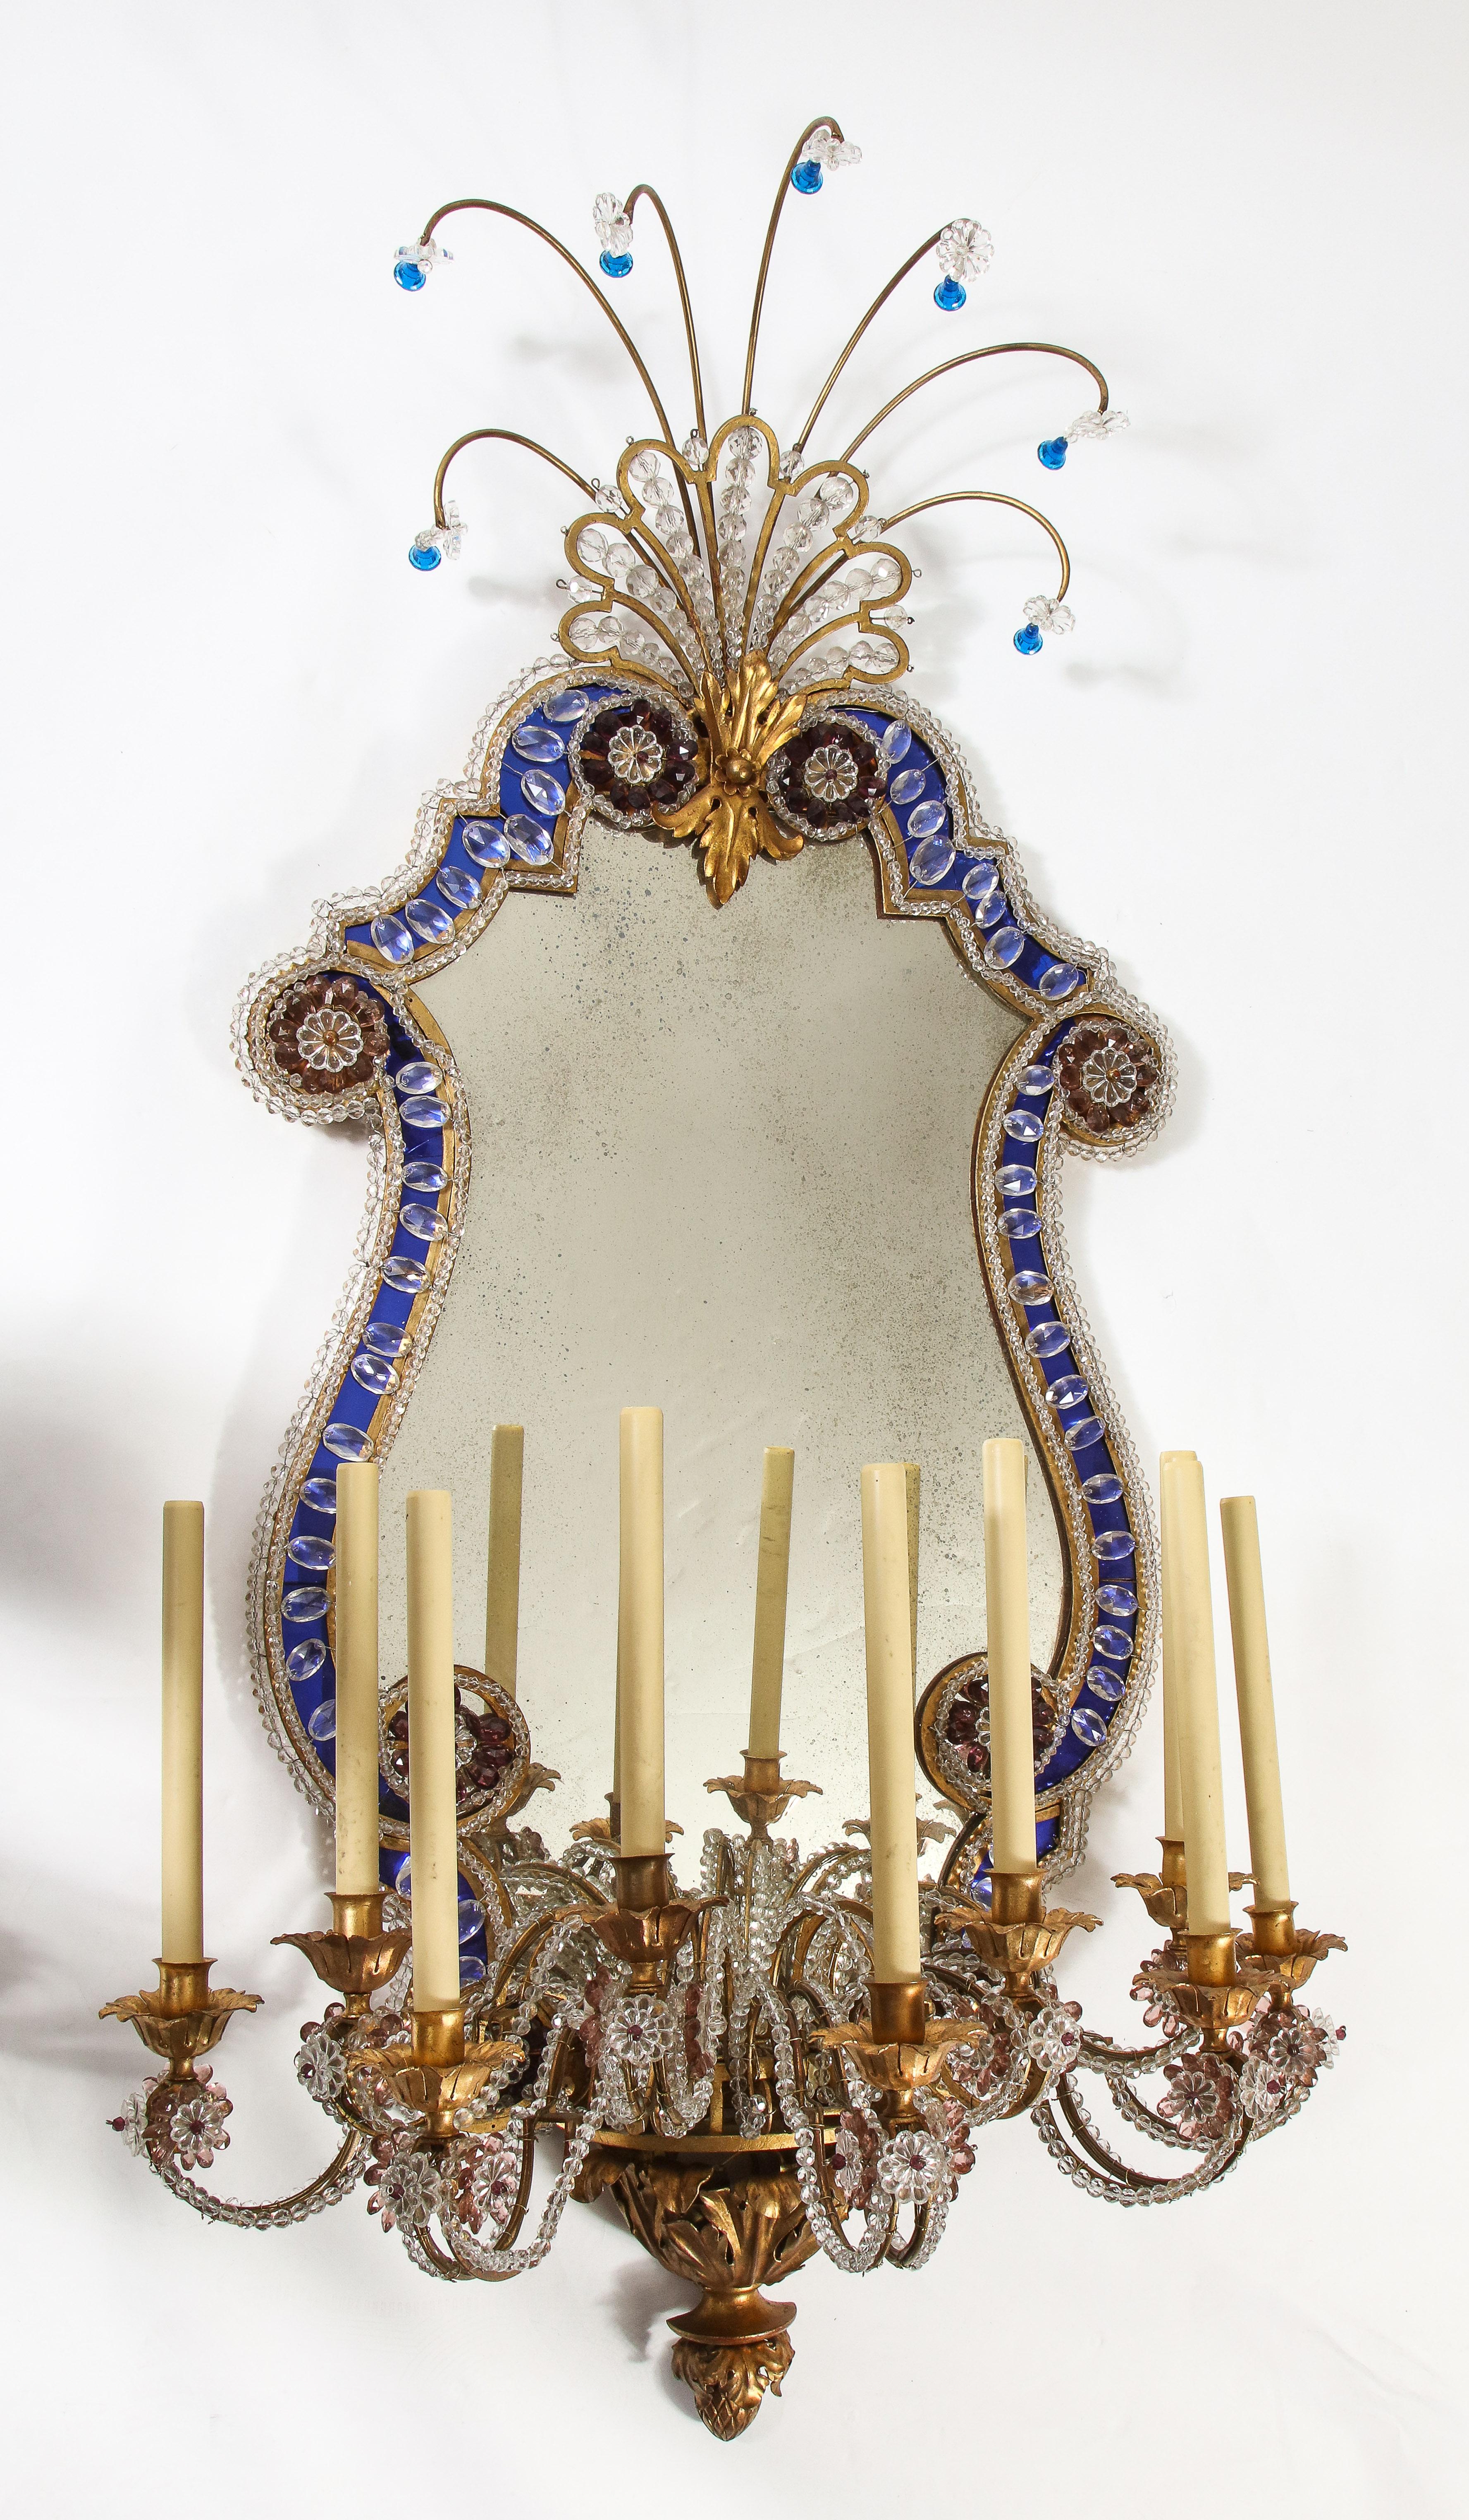 A monumental pair of antique french 20th century dore bronze mounted mirrored and breaded crystal nine-arm sconces attributed to Baguès. Each sconce is beautifully decorated with an antique mirrored back, which is encased in a blue crystal boarder,